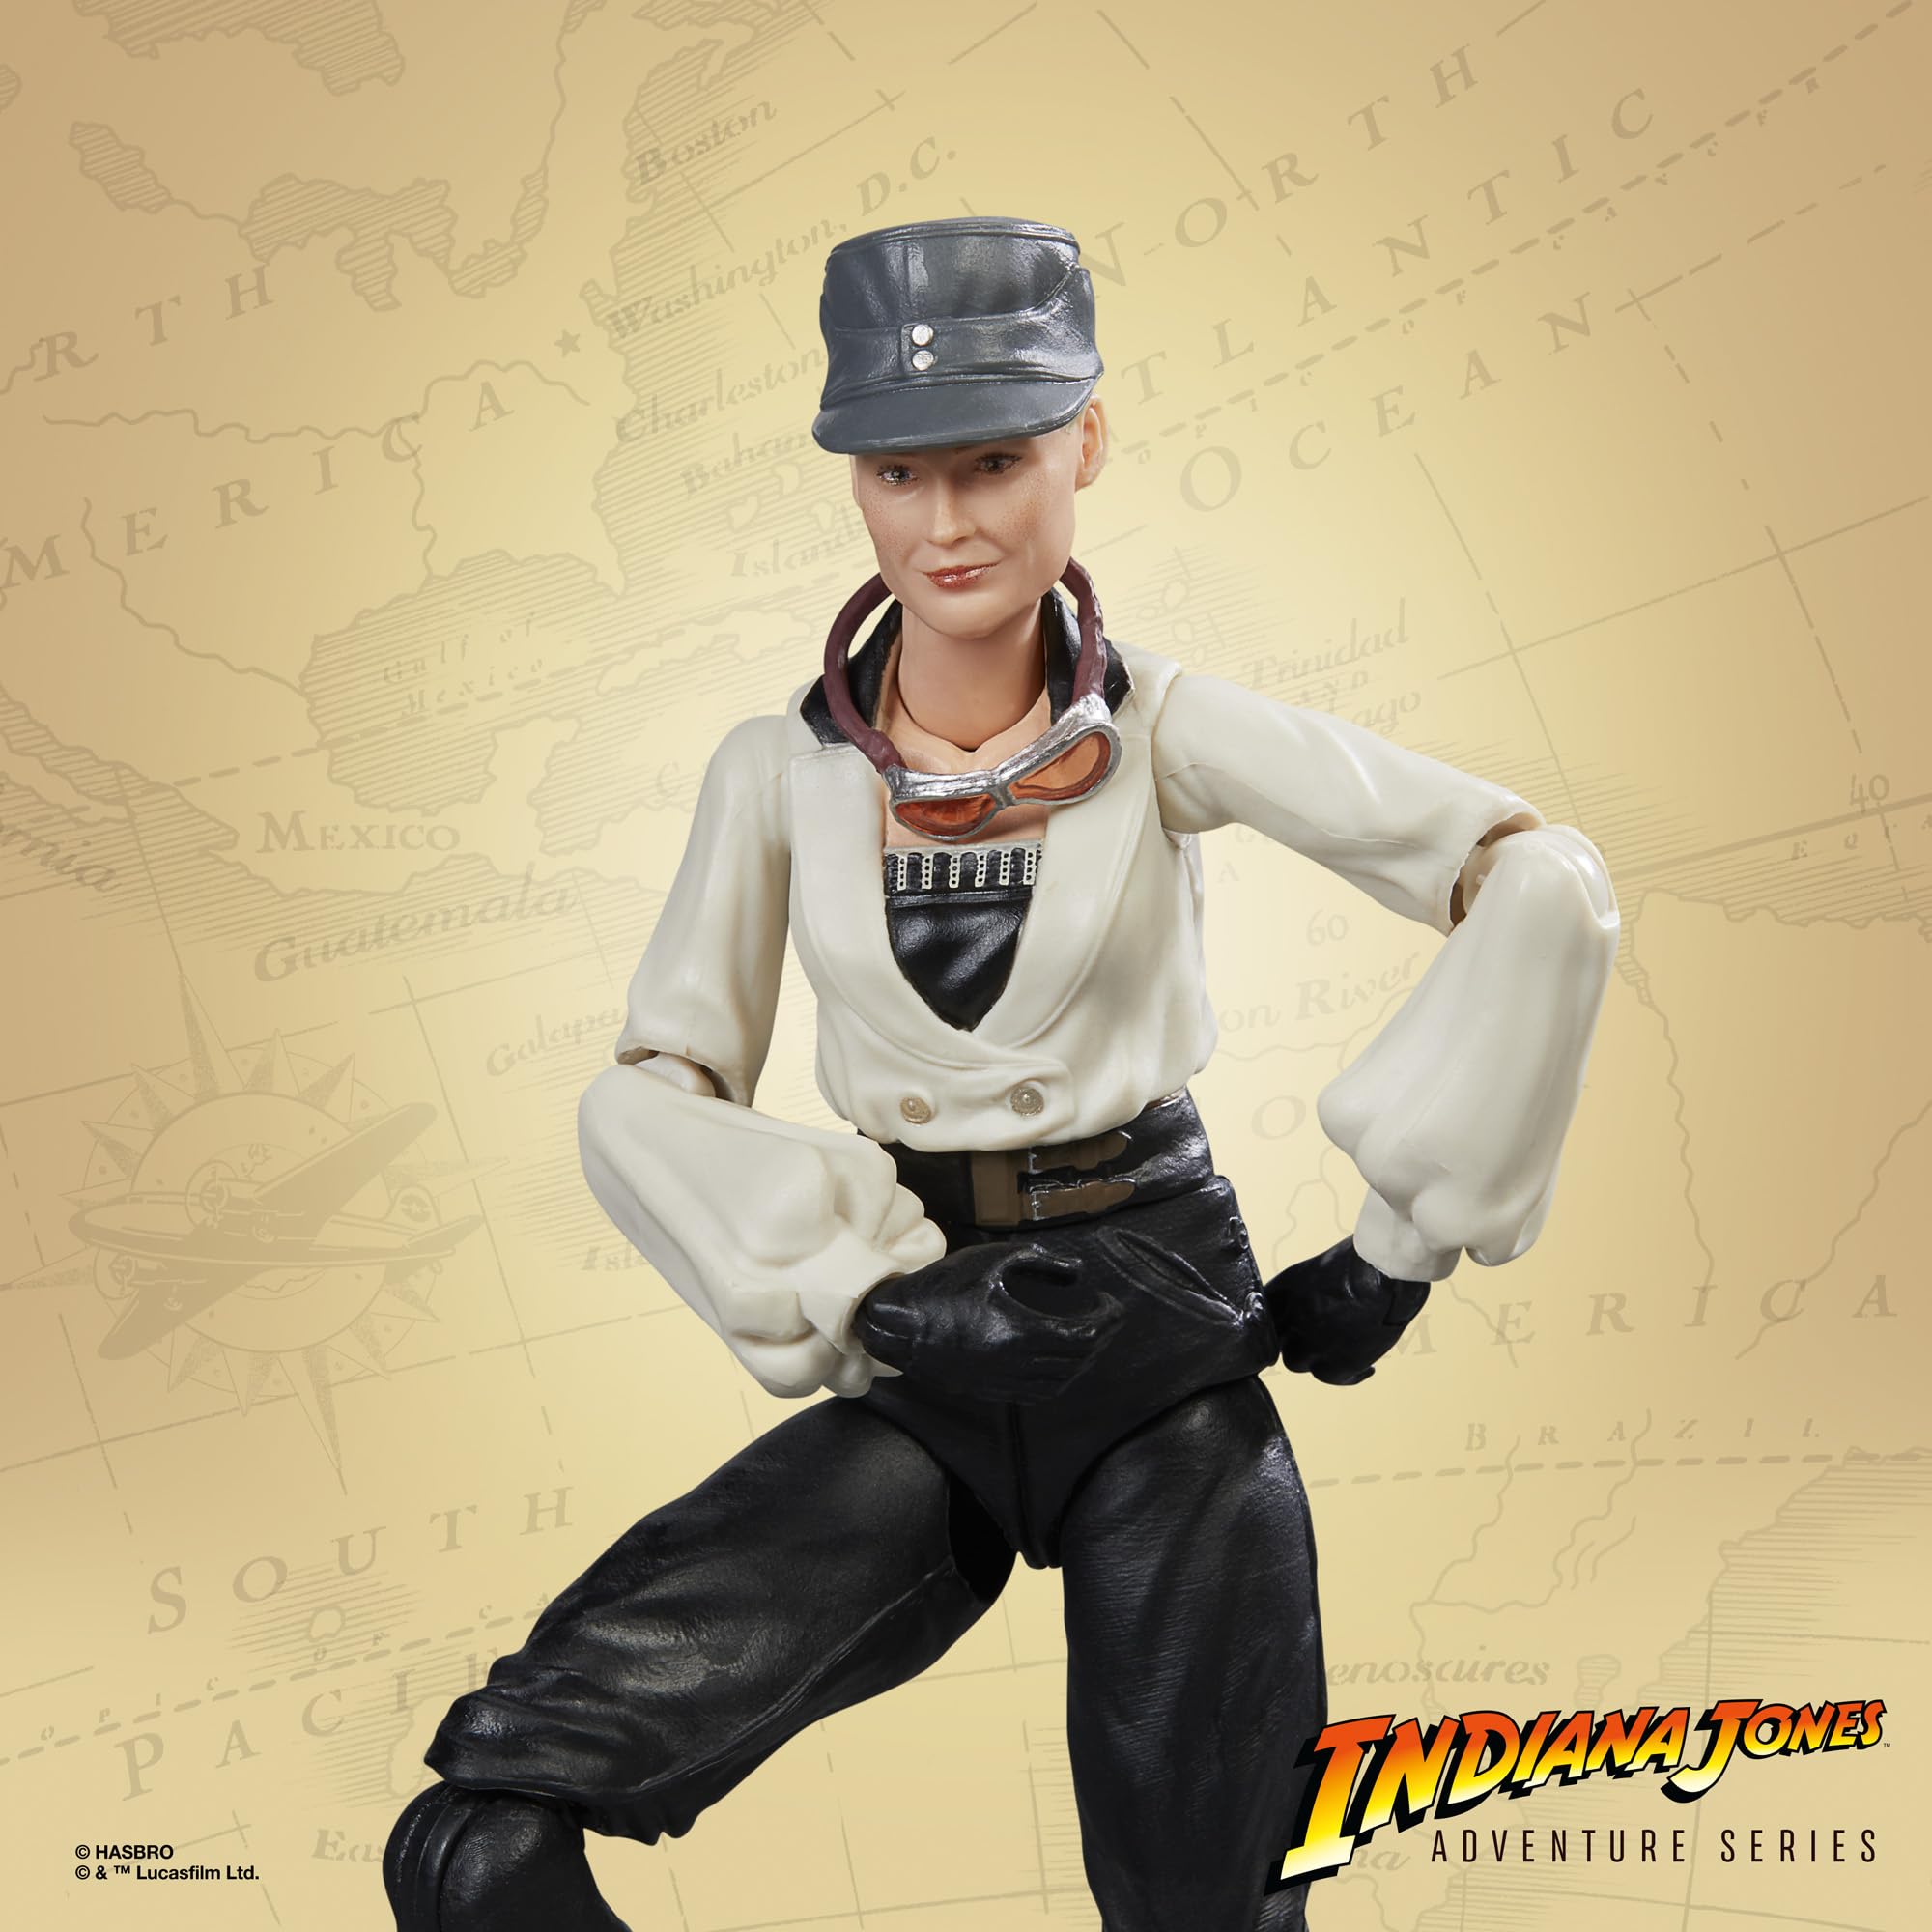 Indiana Jones and The Last Crusade Adventure Series Dr. Elsa Schneider Action Figure, 6-inch Action Figures, Toys for Kids Ages 4 and Up